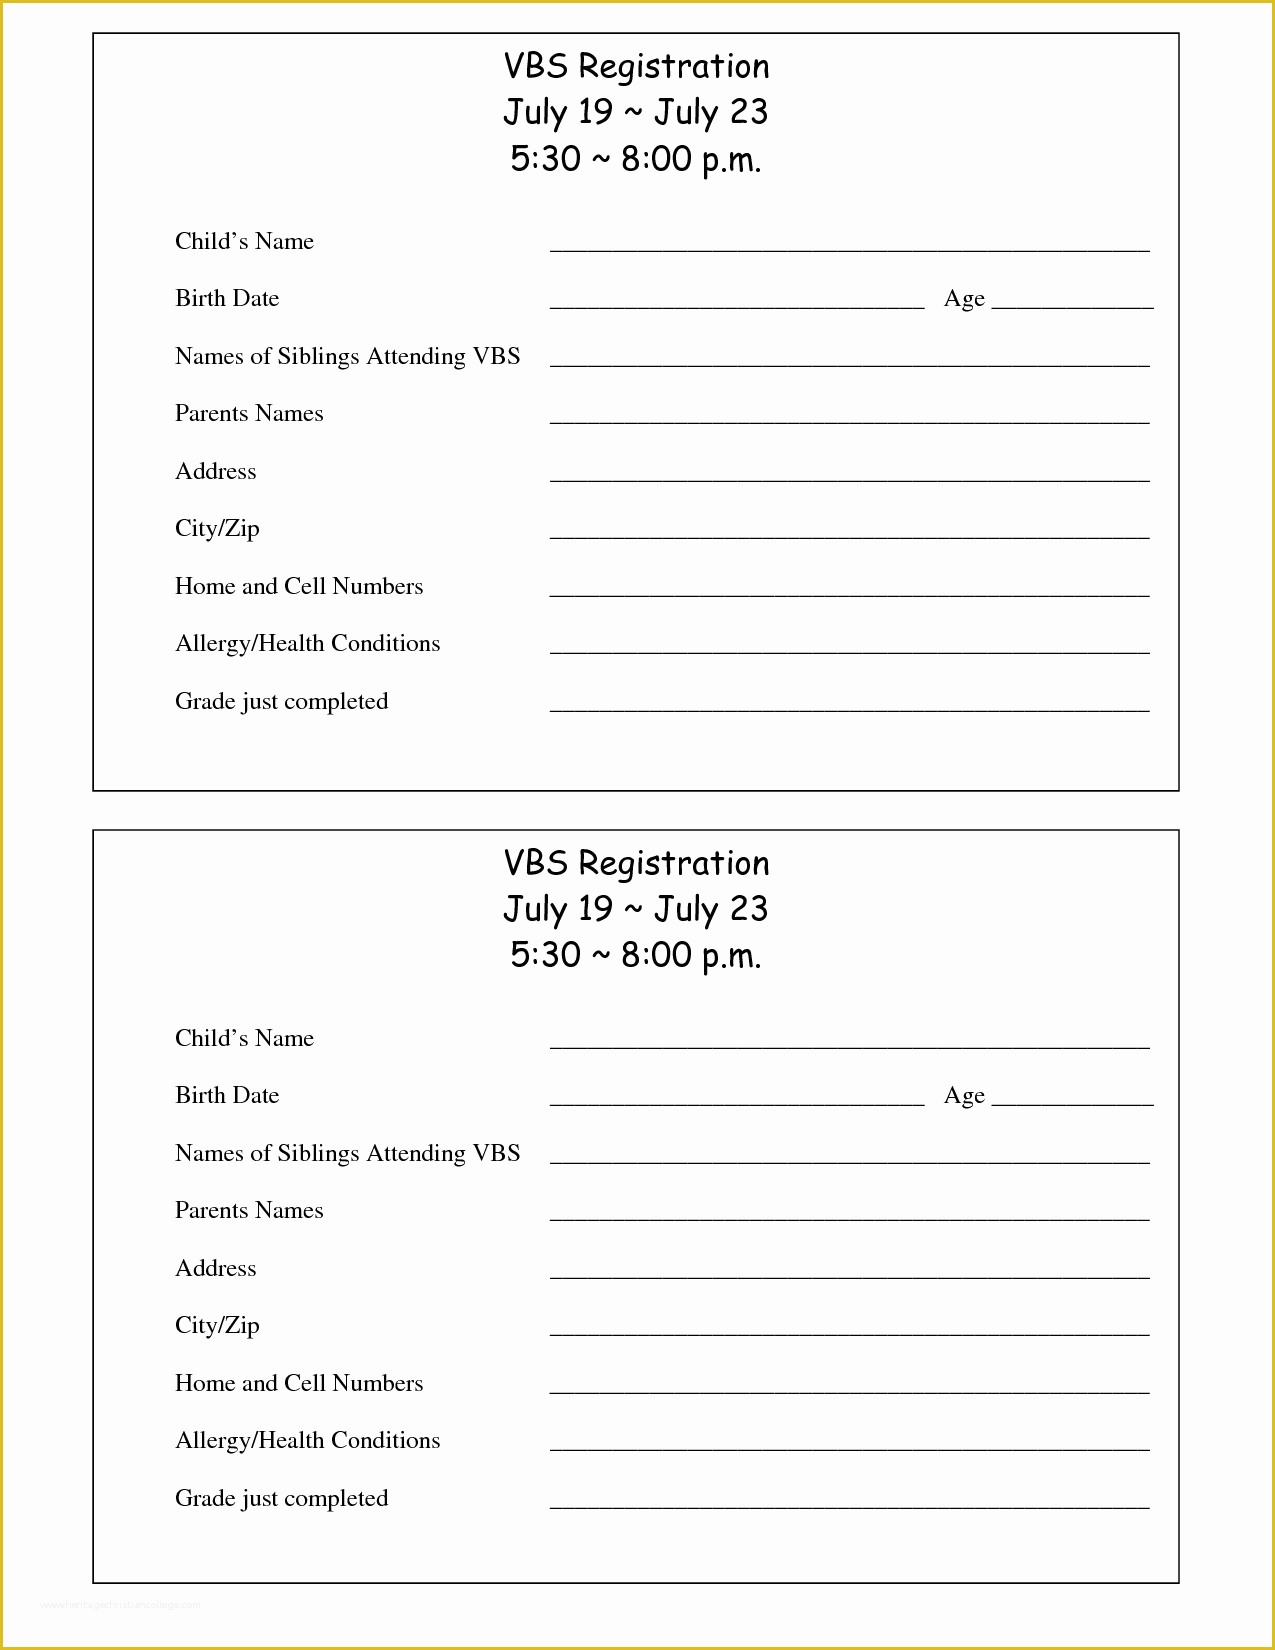 Free Registration form Template Of Printable Vbs Registration form Template